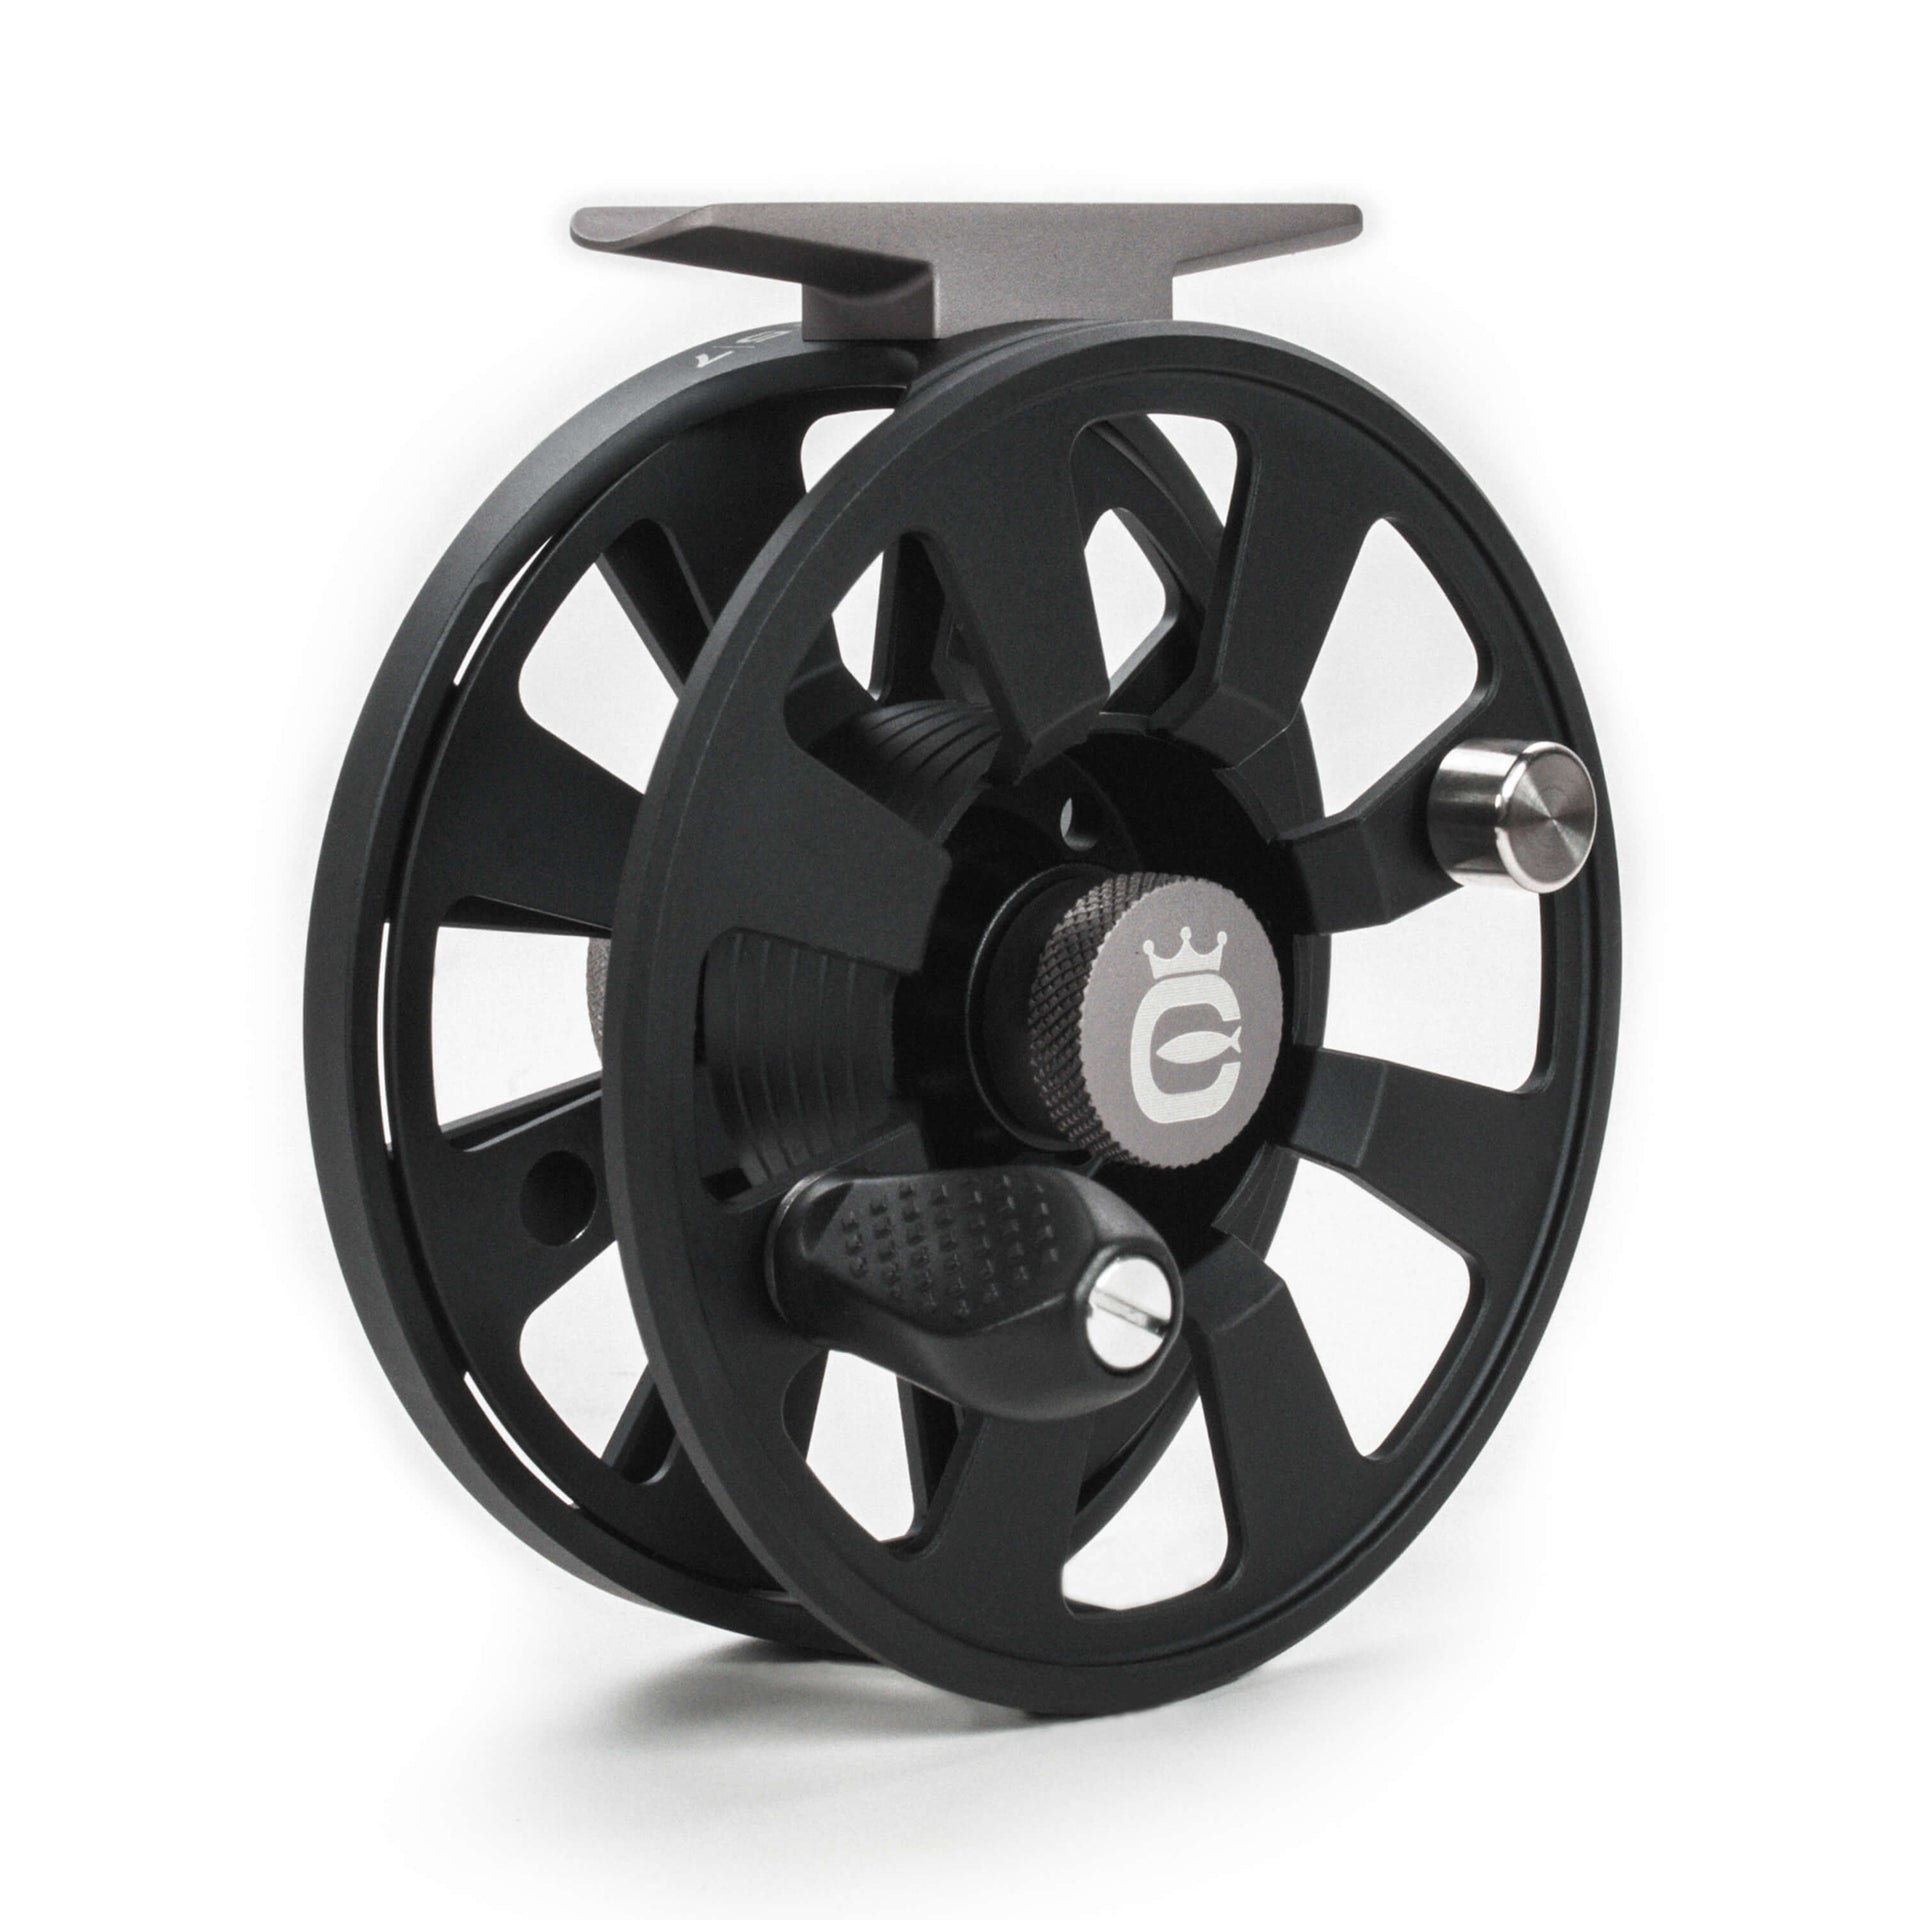 Cortland Fairplay Fly Fishing Reel with Extra Spool - sporting